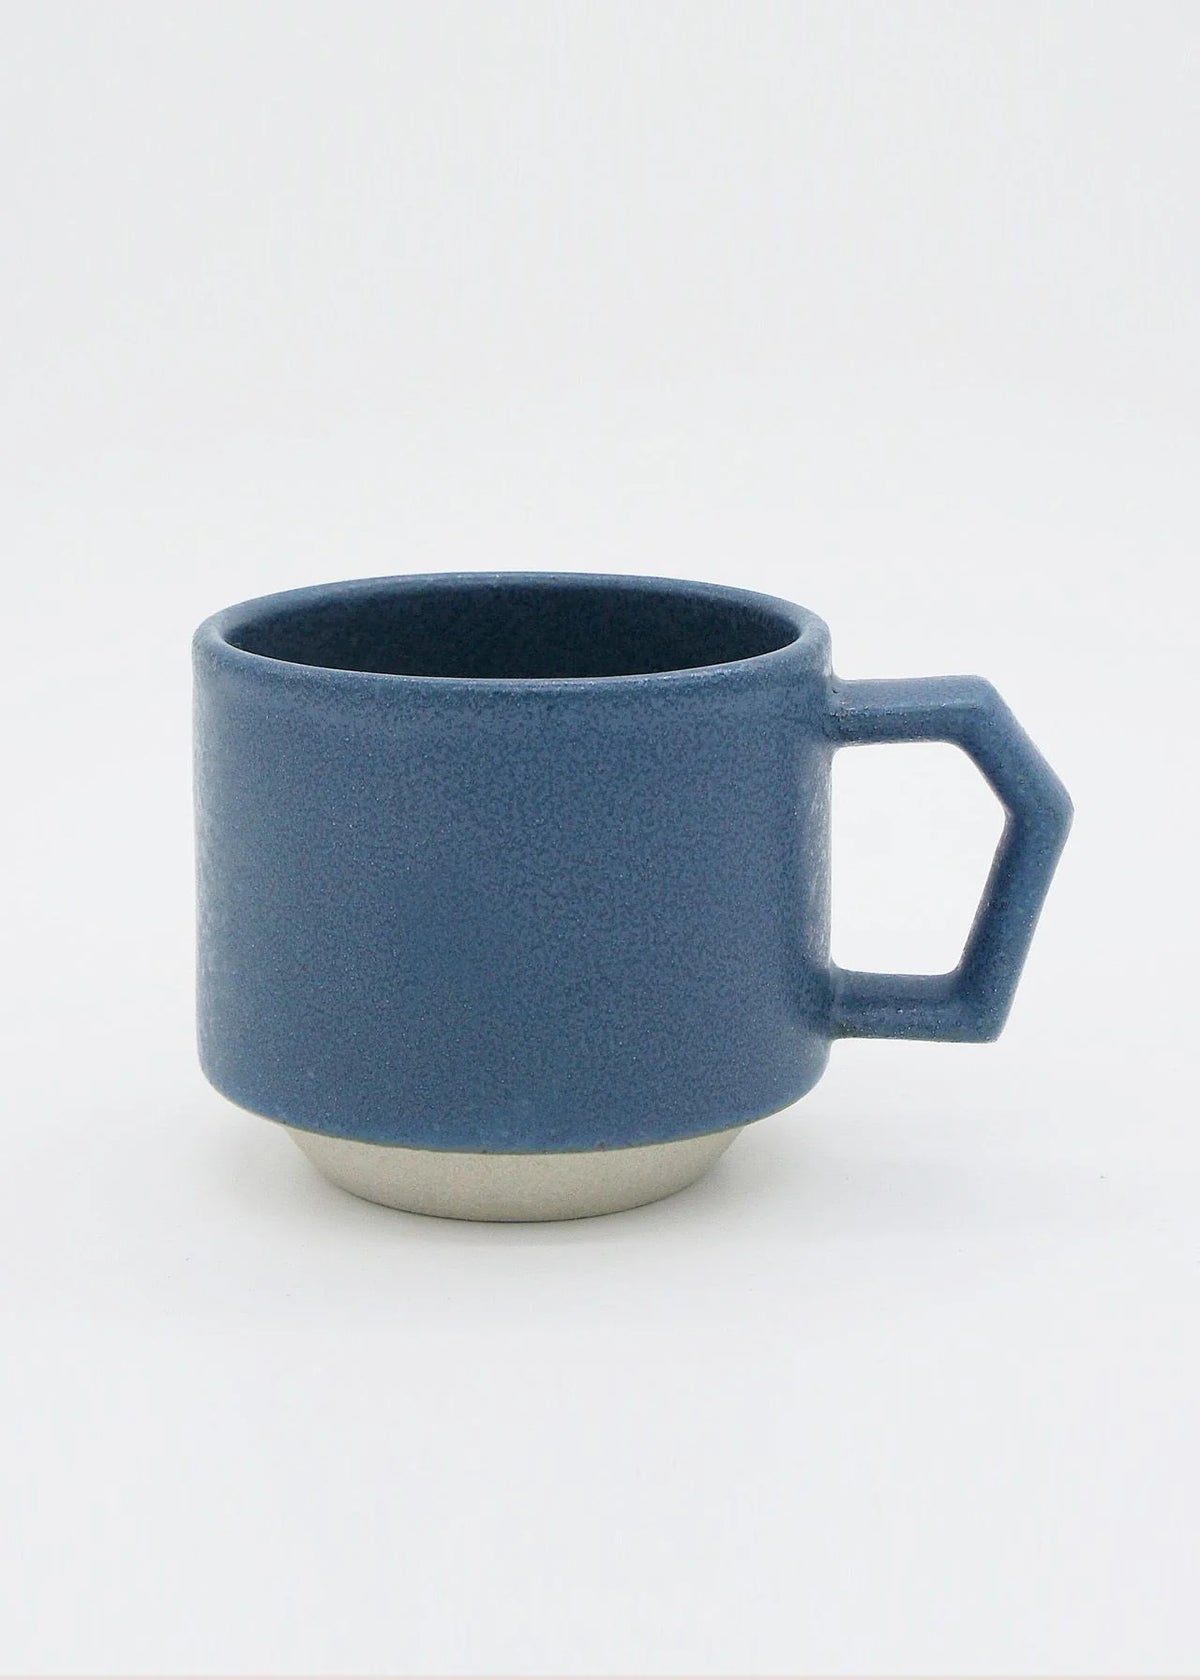 A Stacking Mug - Navy by CHIPS Inc. with a handle on a white background.